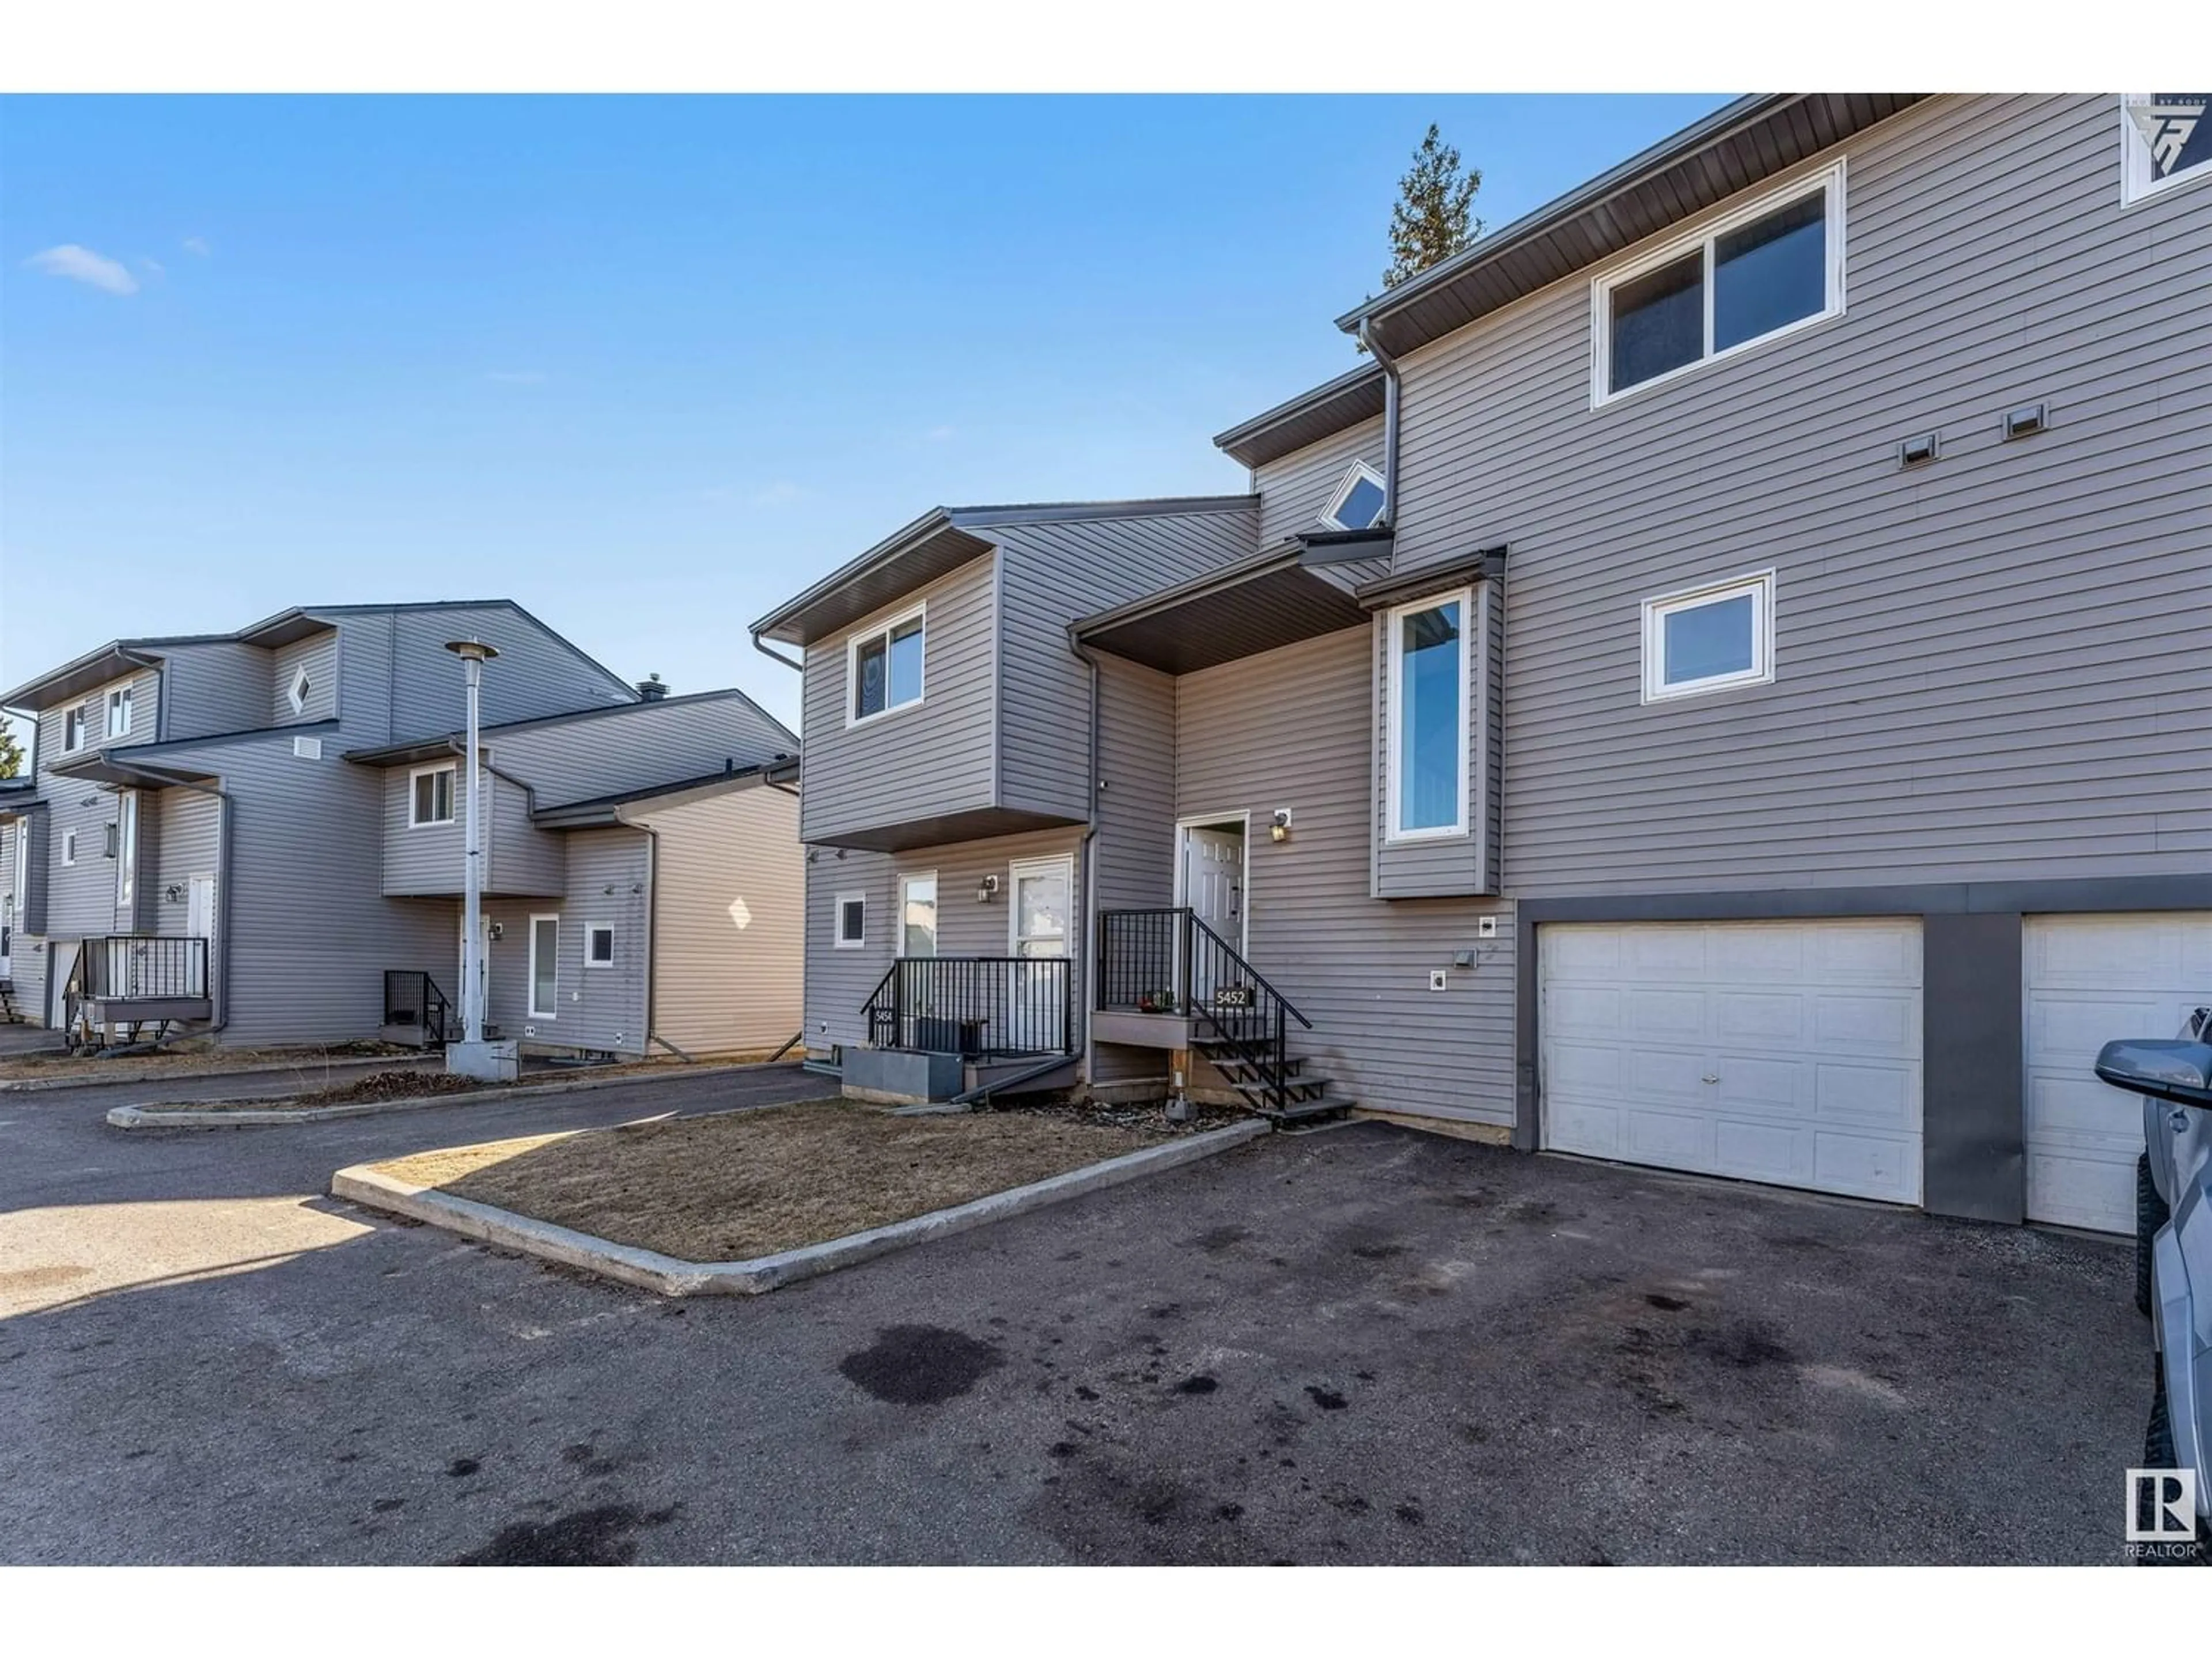 A pic from exterior of the house or condo for 5452 38A AV NW, Edmonton Alberta T6L2H5